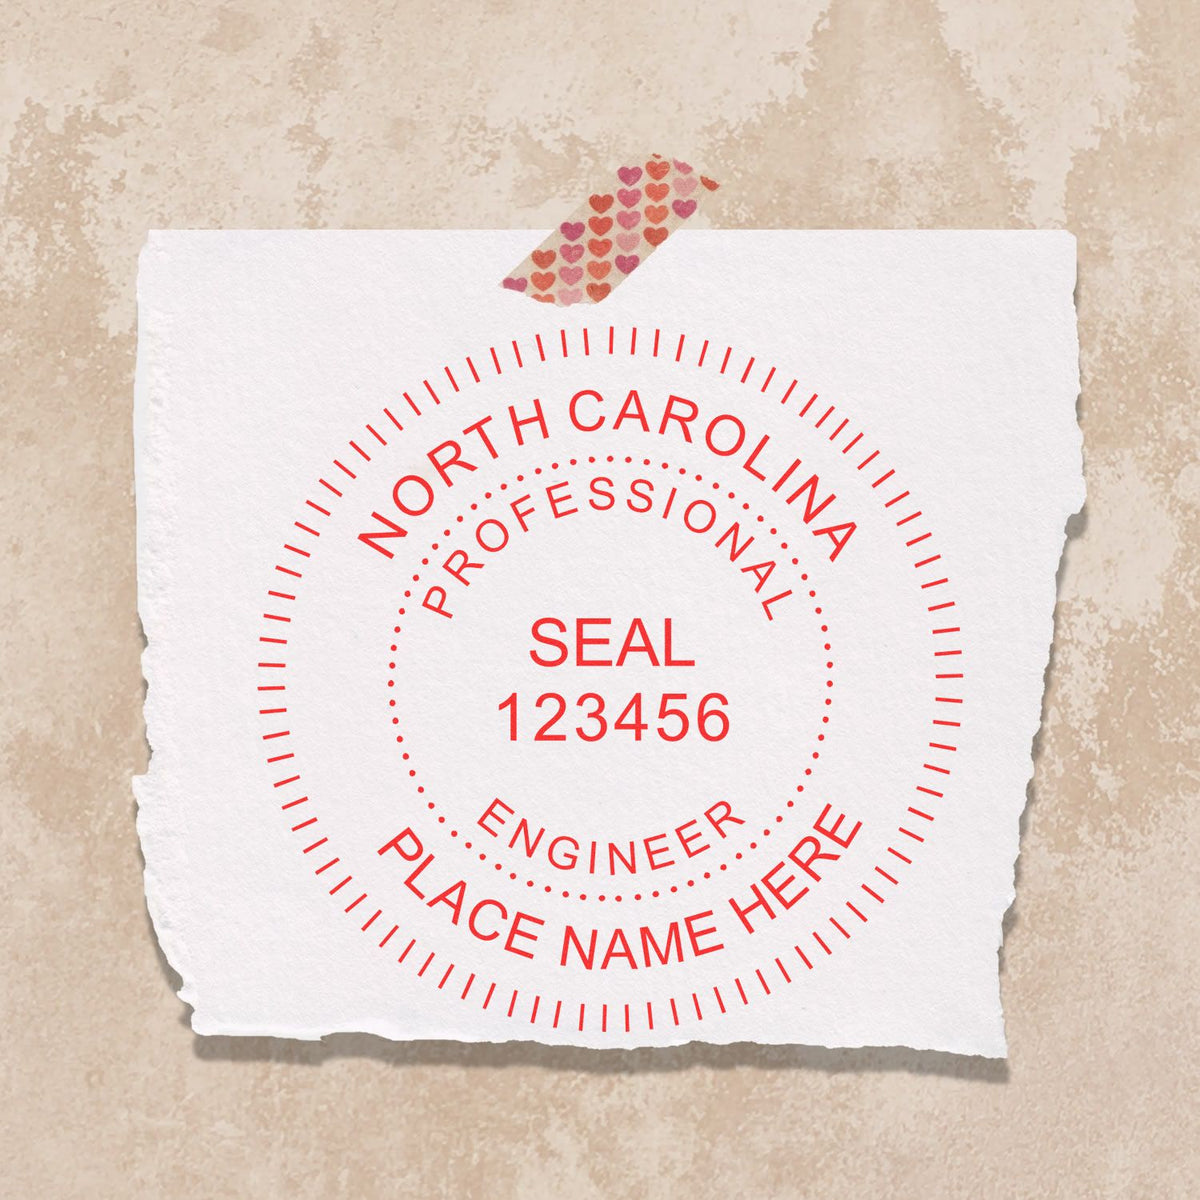 An alternative view of the Slim Pre-Inked North Carolina Professional Engineer Seal Stamp stamped on a sheet of paper showing the image in use